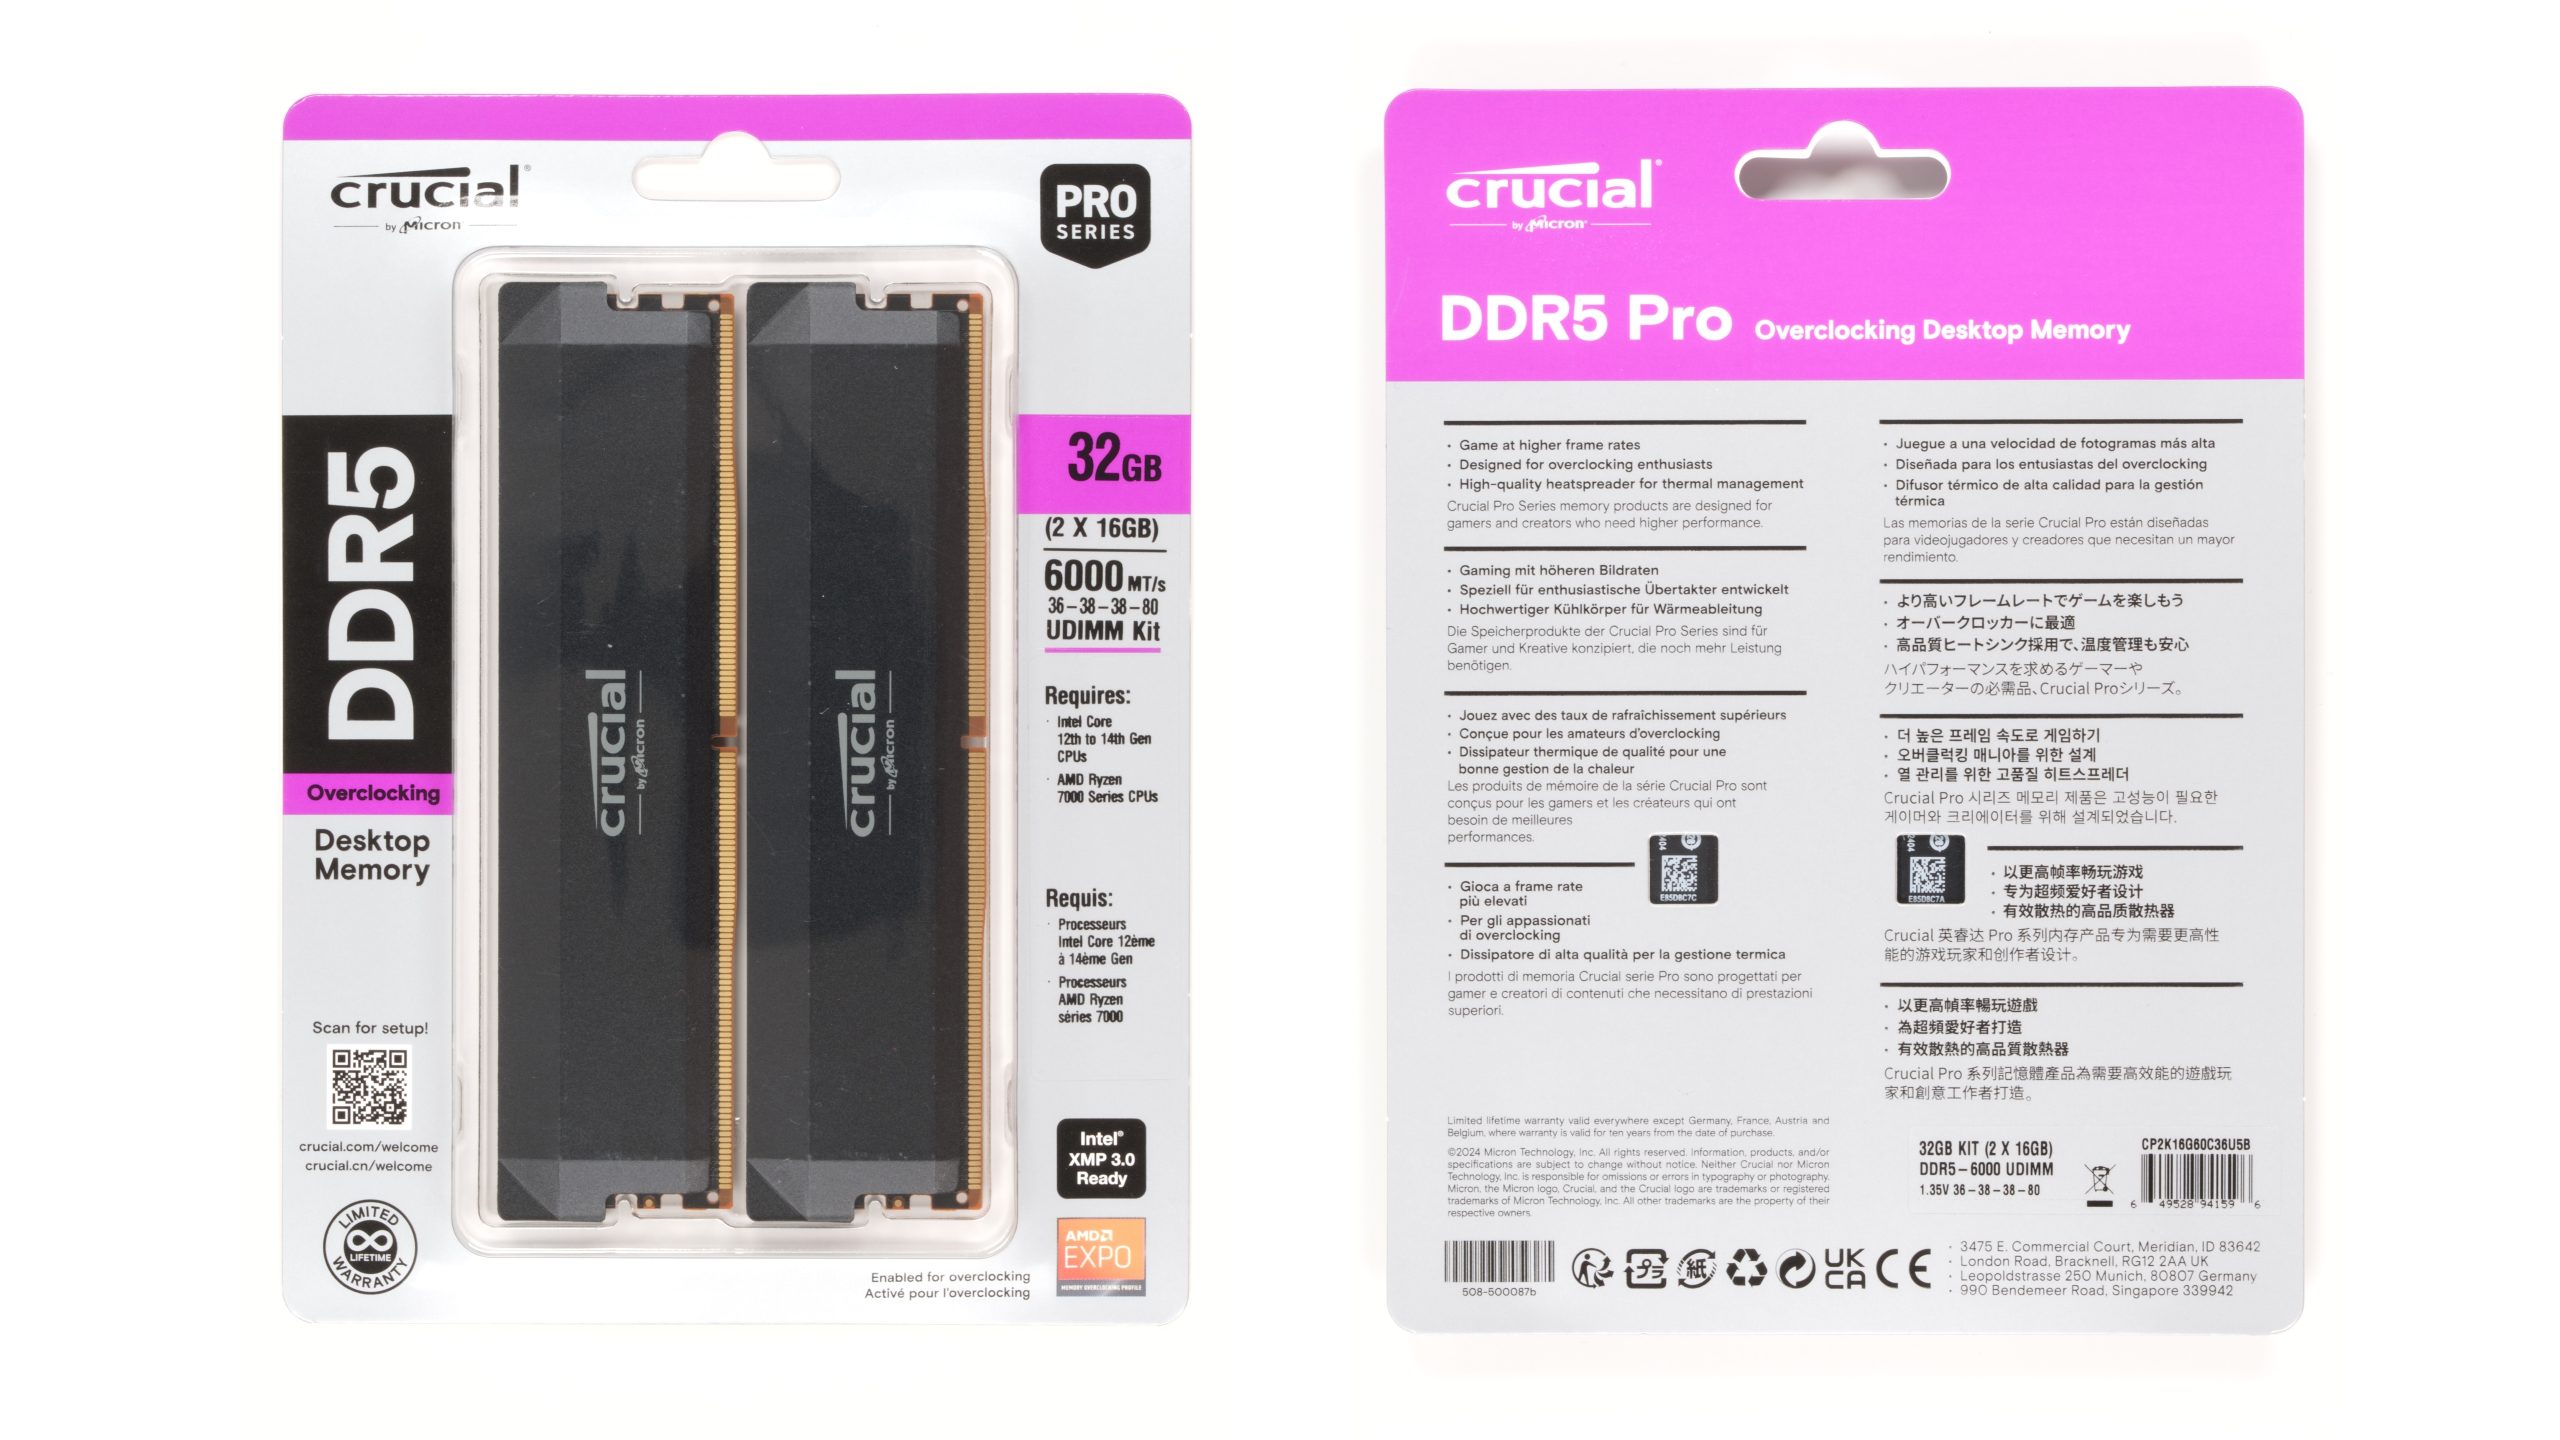 Micron's next DDR5 evolution - Crucial DDR5 Pro and Pro overclocking kits review with Teardown and OC